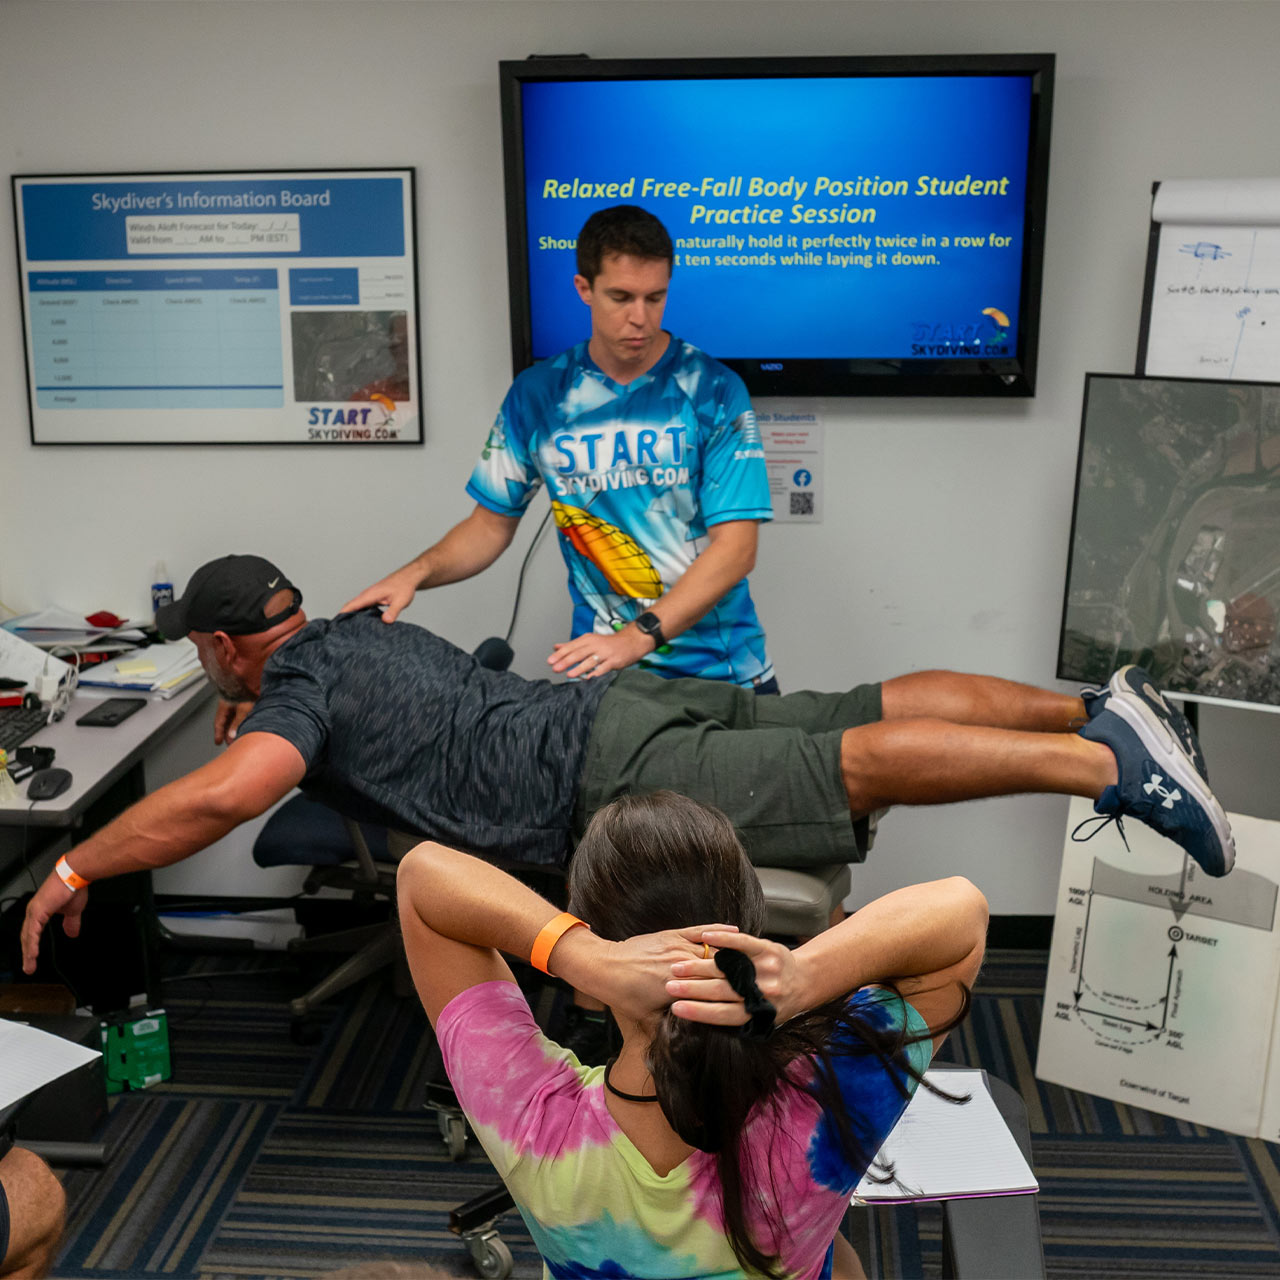 A skydiving student practices his relaxed freefall body position with the assistance of the instructor